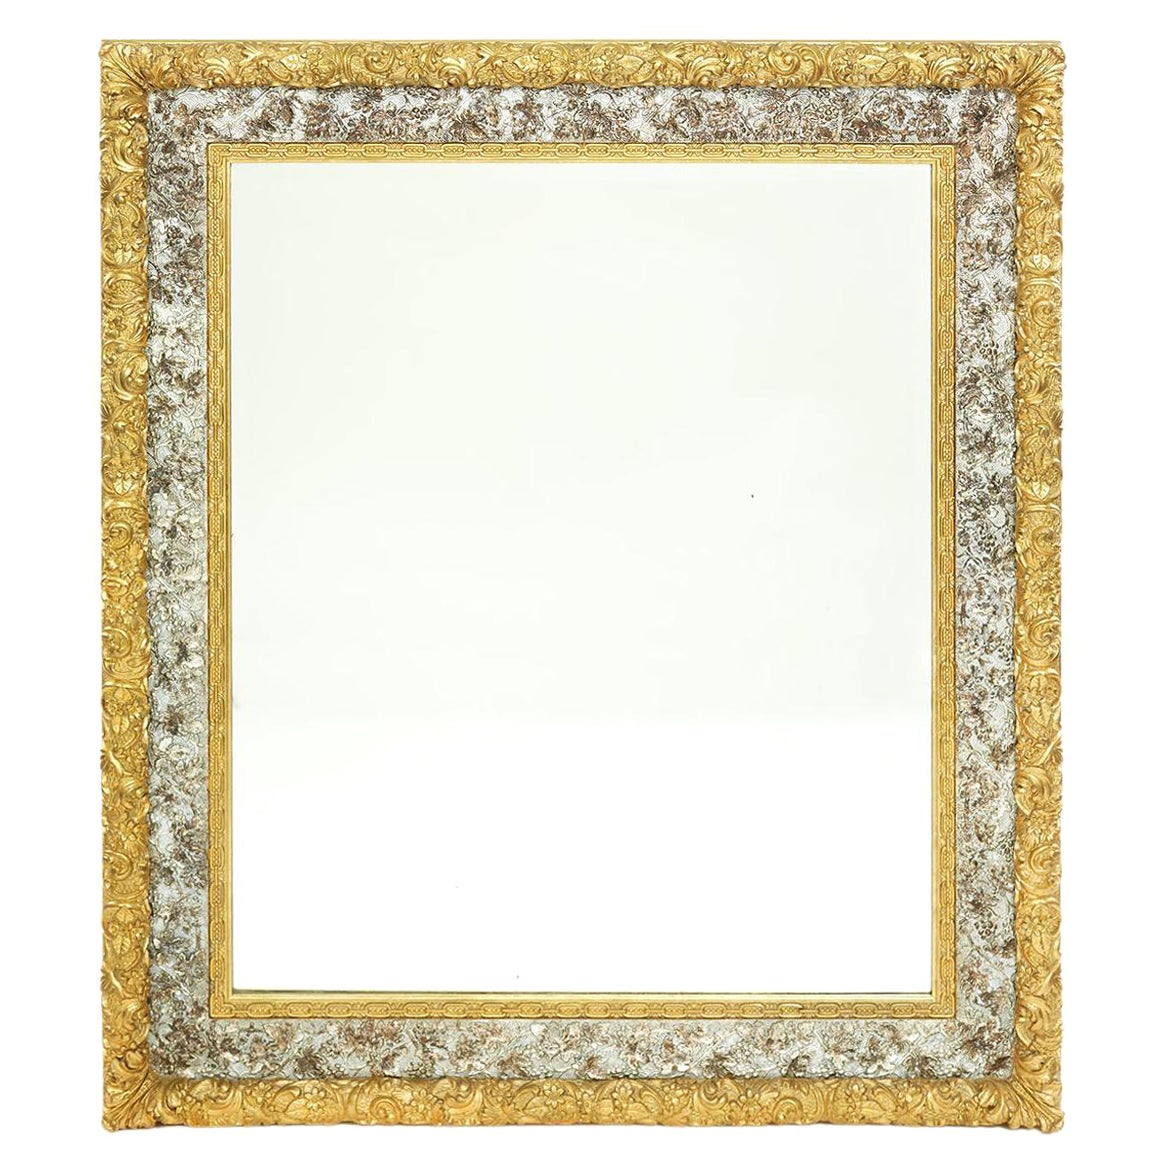 19th Century Gilt Wood Framed Beveled Wall Mirror For Sale